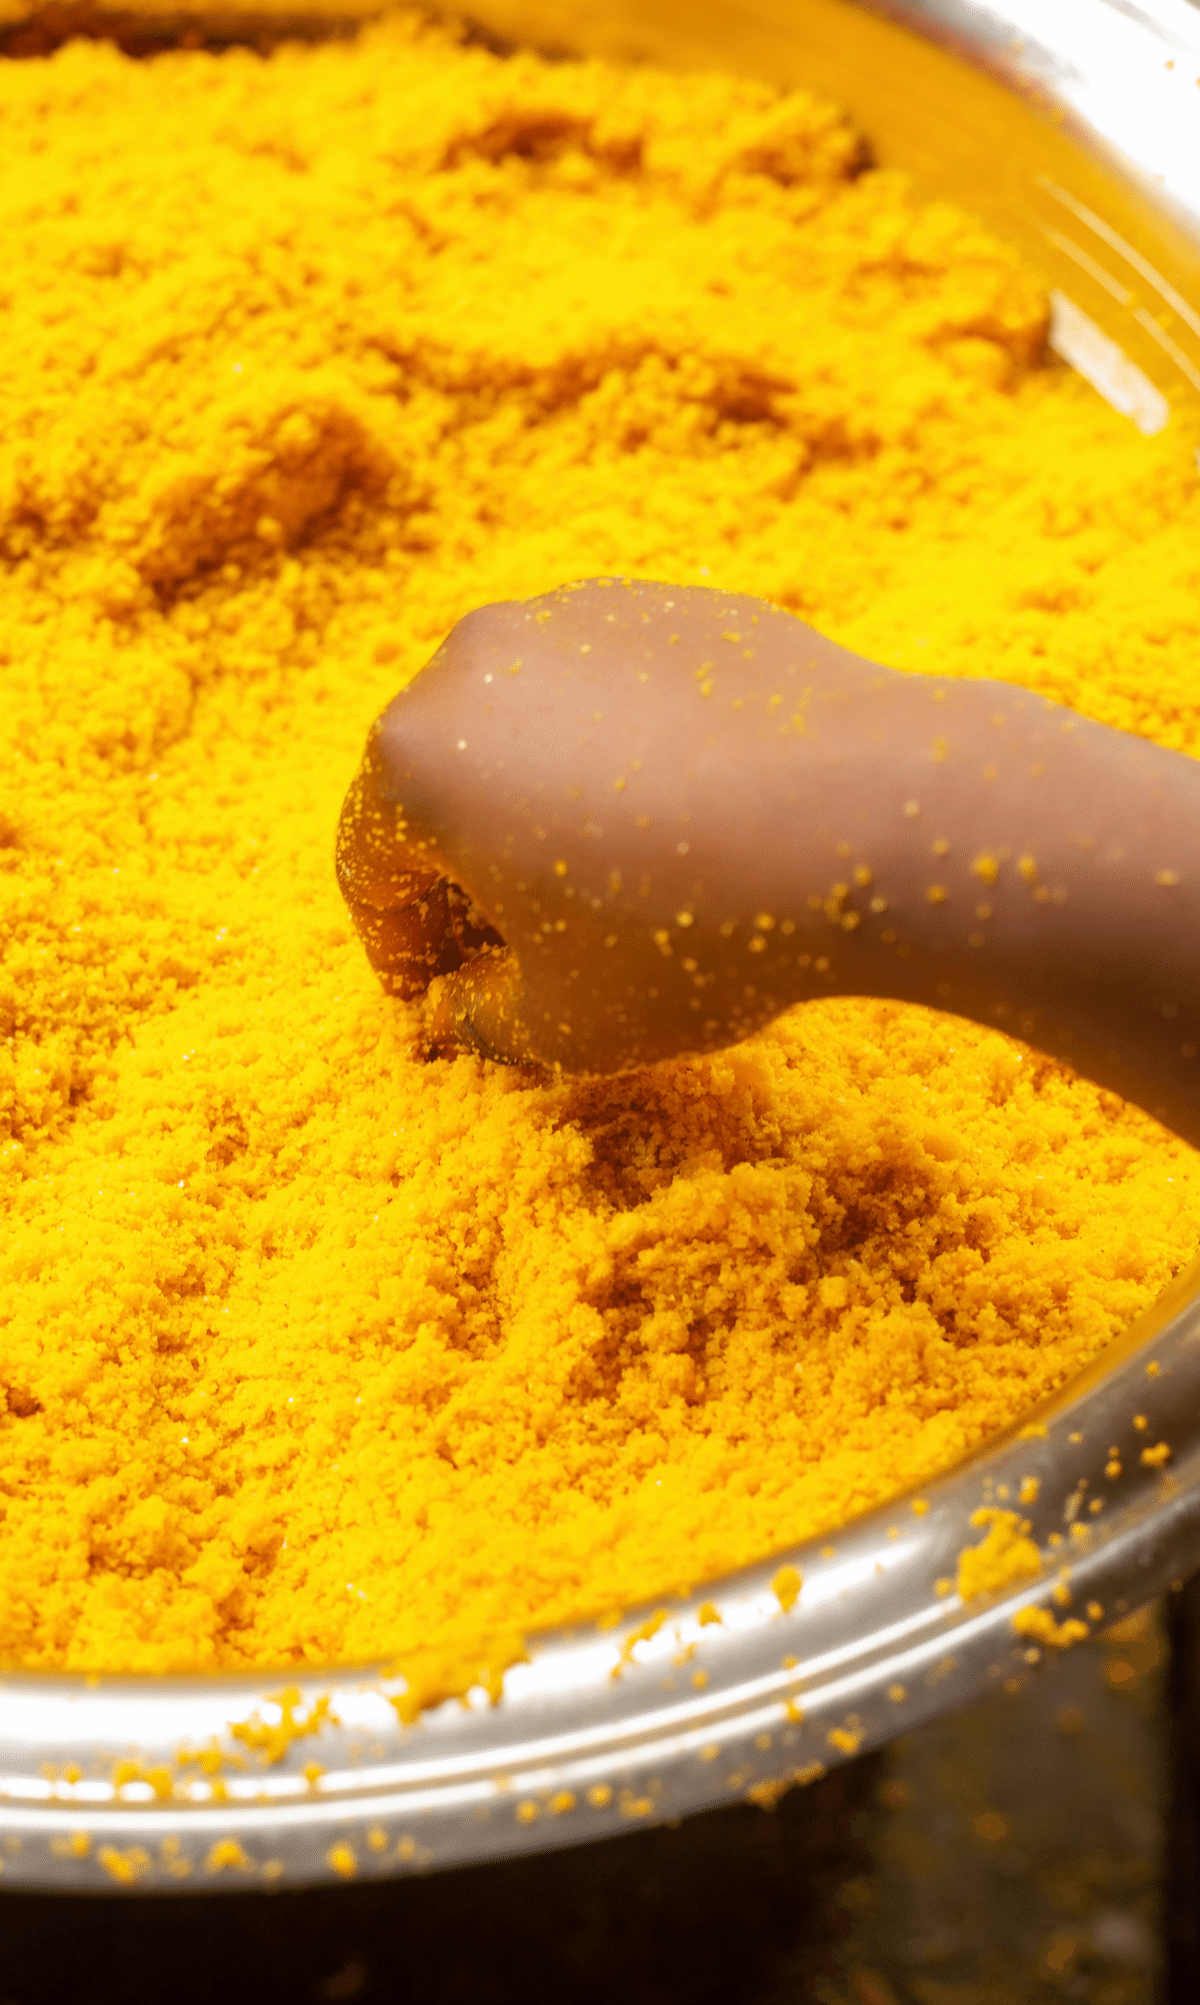 Get Healthy With The Best Turmeric Powder For Cooking!